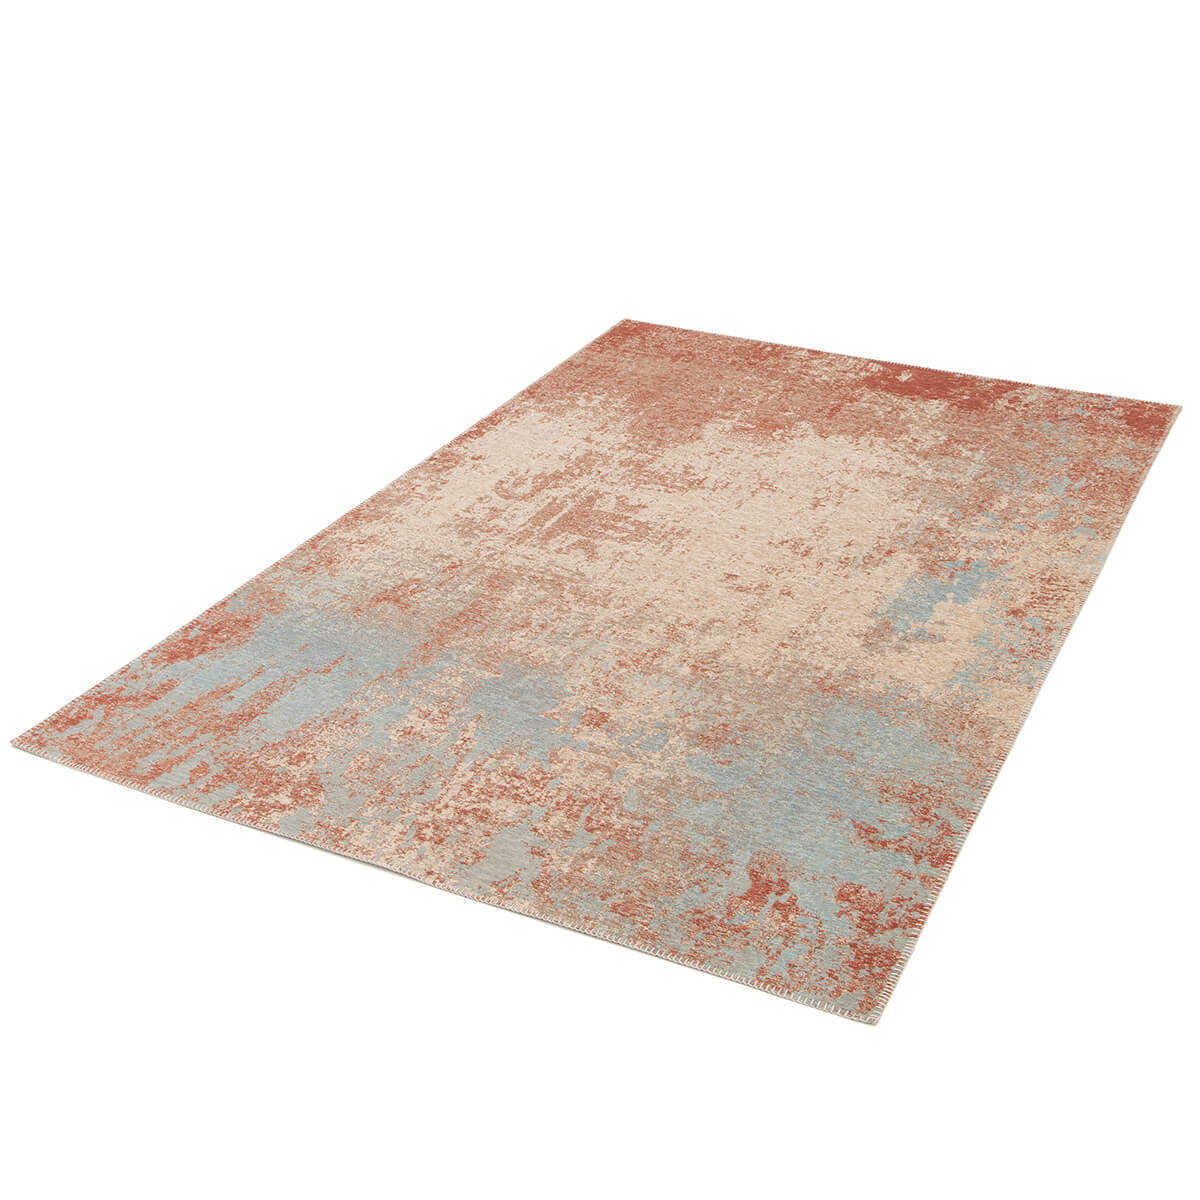 Maze - Earth Abstract Blue Indoor and Outdoor Rug - 160x230cm product image